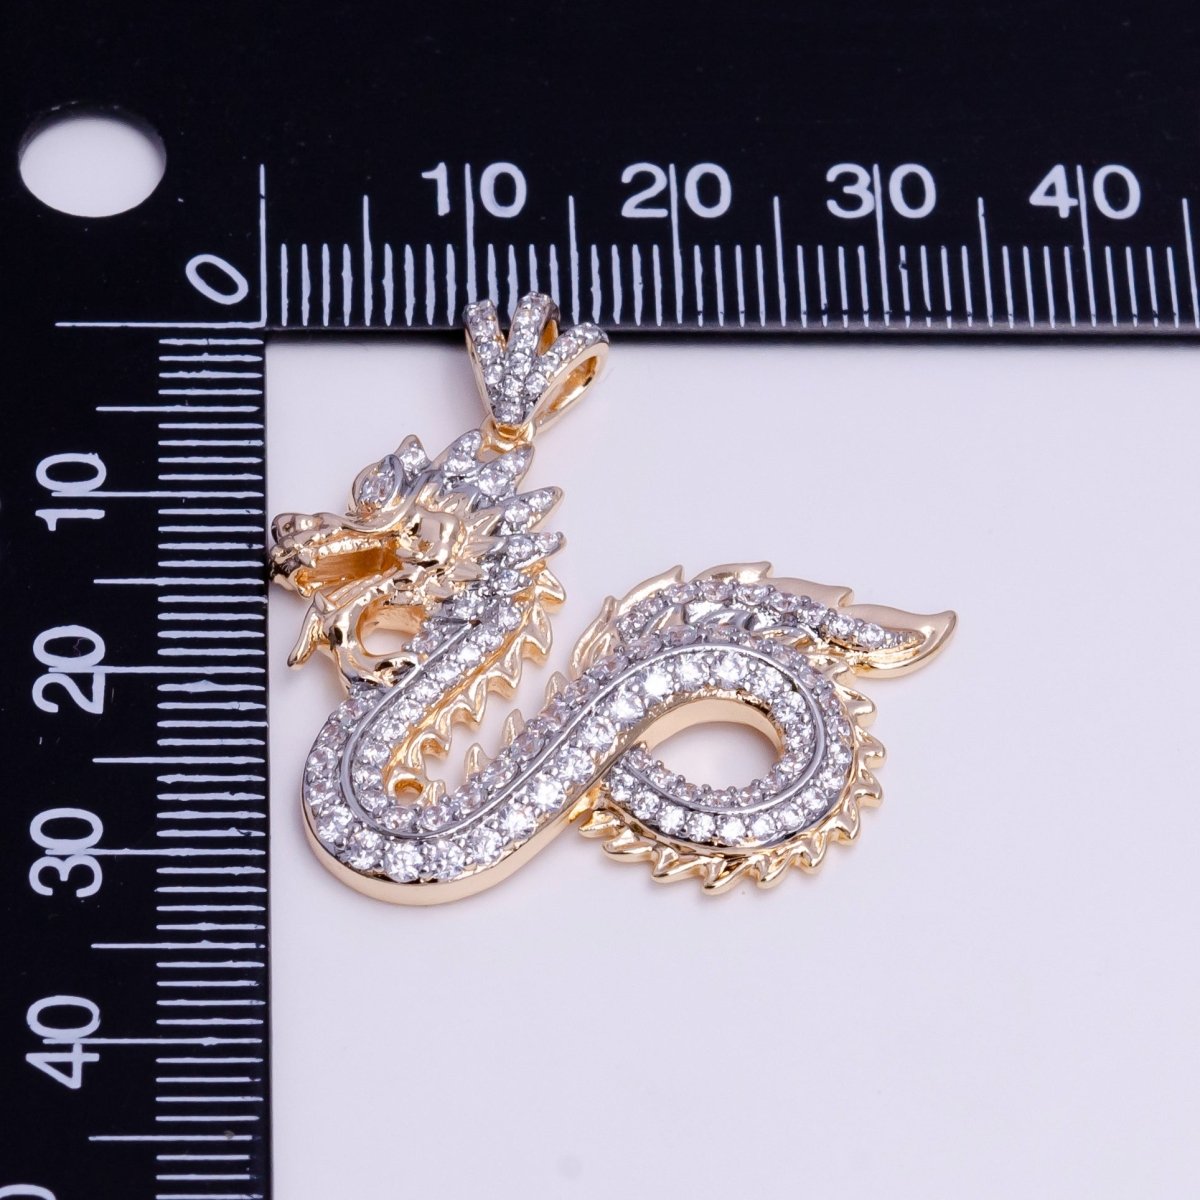 18k Gold Filled Dragon Pendant Chinese Zodiac Animal Charm for Necklace Statement Jewelry AA-753 - DLUXCA